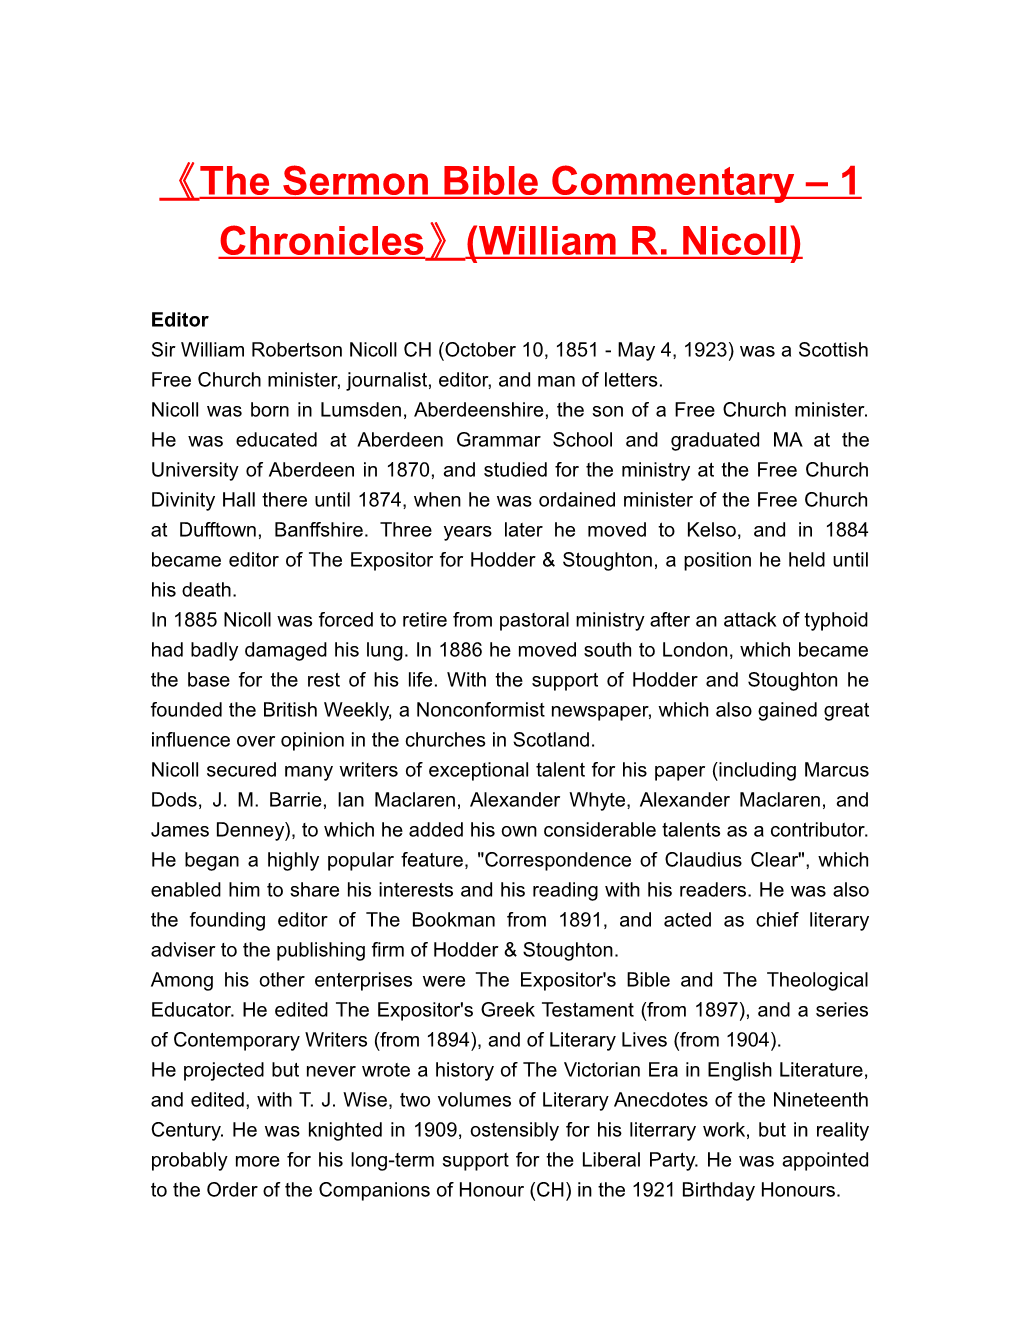 The Sermon Bible Commentary 1 Chronicles (William R. Nicoll)